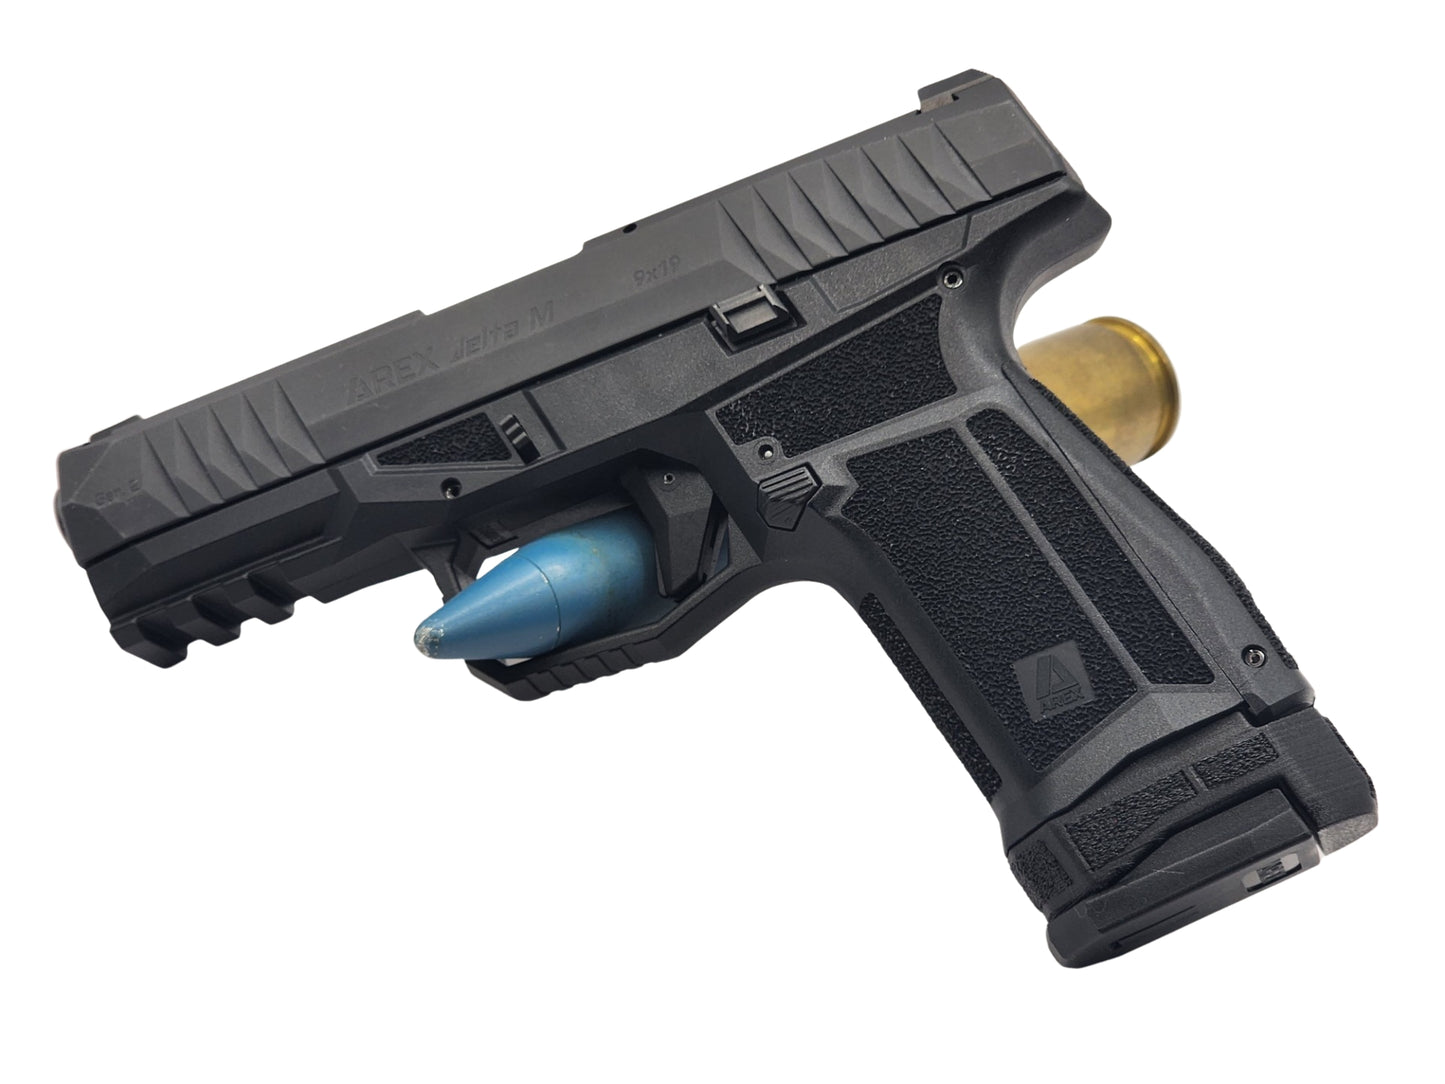 The AREX Delta M is a compact slim firearm with excellent ergonomics and a great trigger.  And using the NULL adapter you can run your full size 17 and 19 round adapters, you can run your big mags in your carry gun